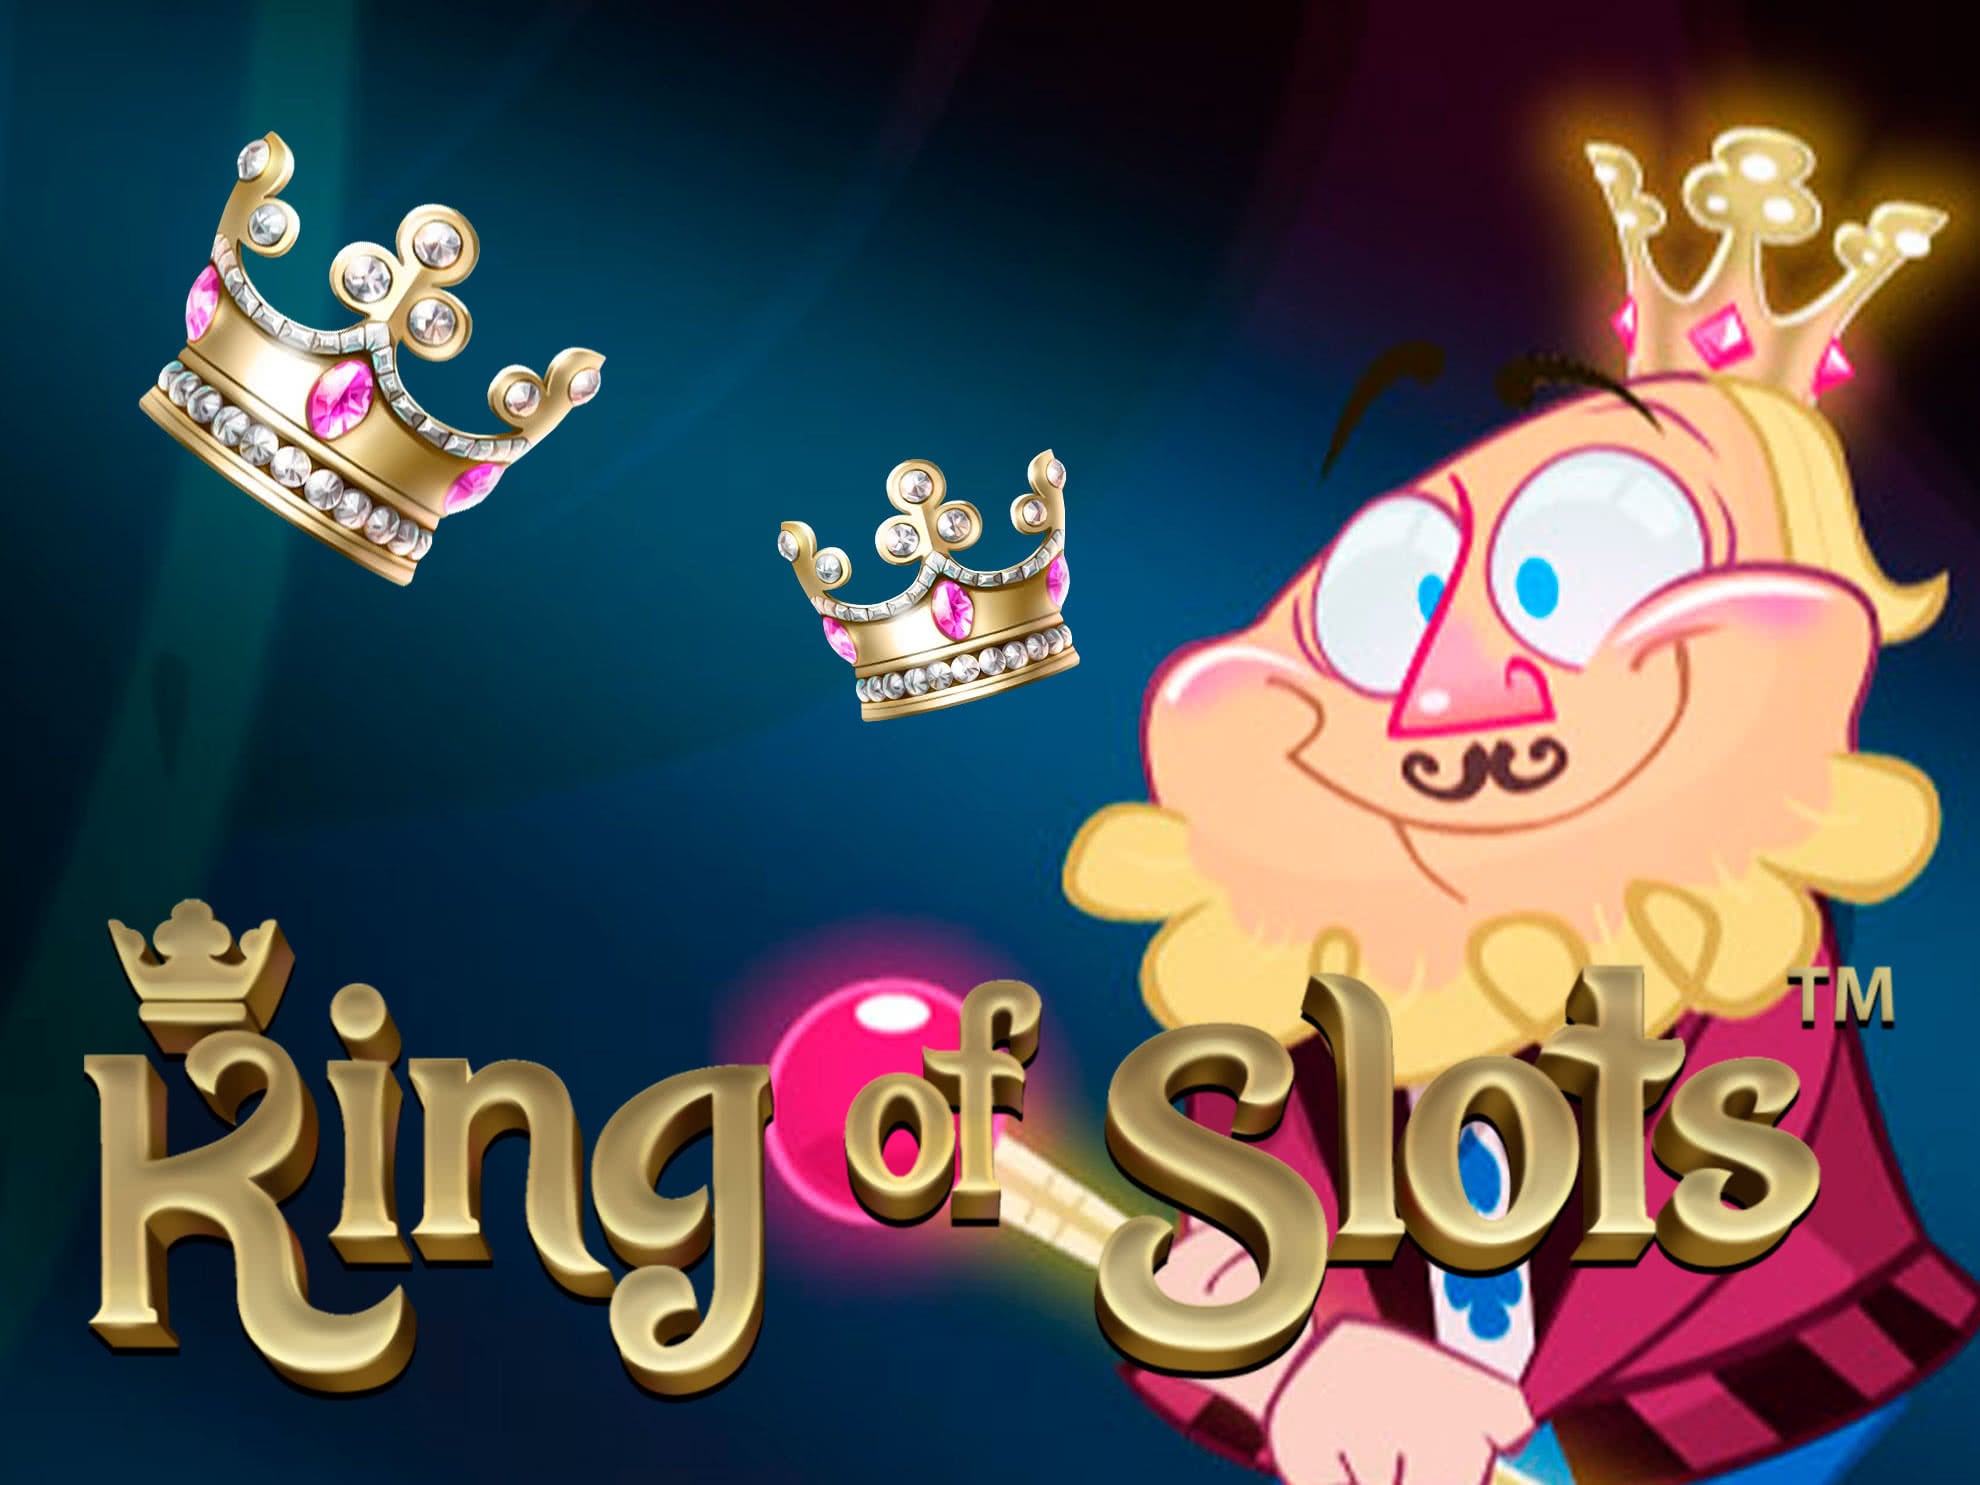 King of Slots Online Game by NetEnt - Play for Free